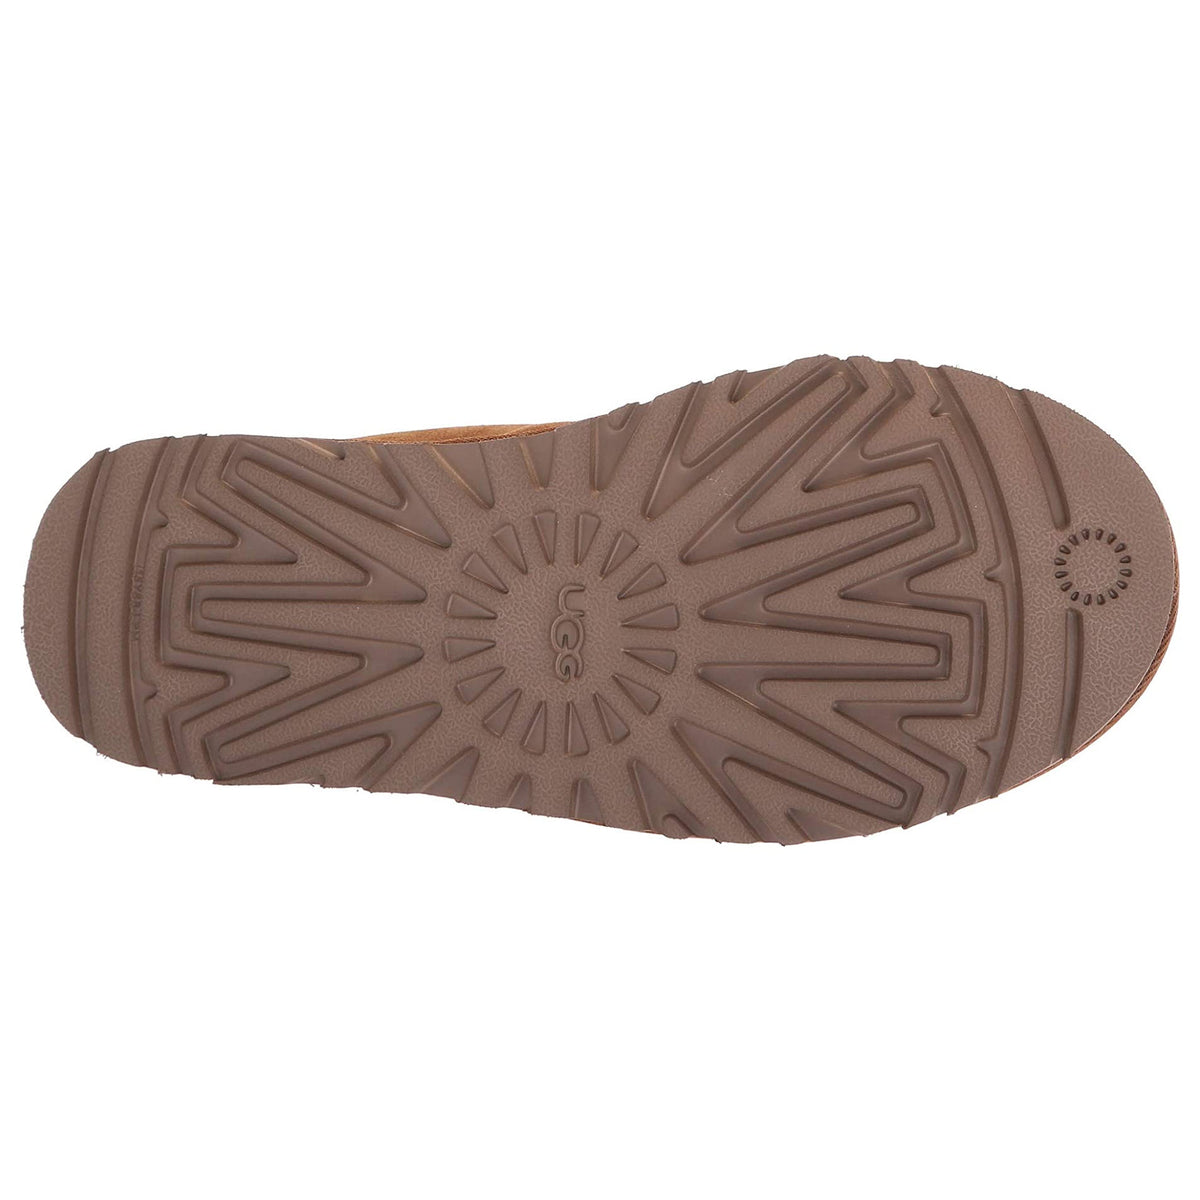 A close-up of the sole of a UGG NEUMEL CHESTNUT - WOMENS boot featuring a Treadlite by UGG tread pattern.